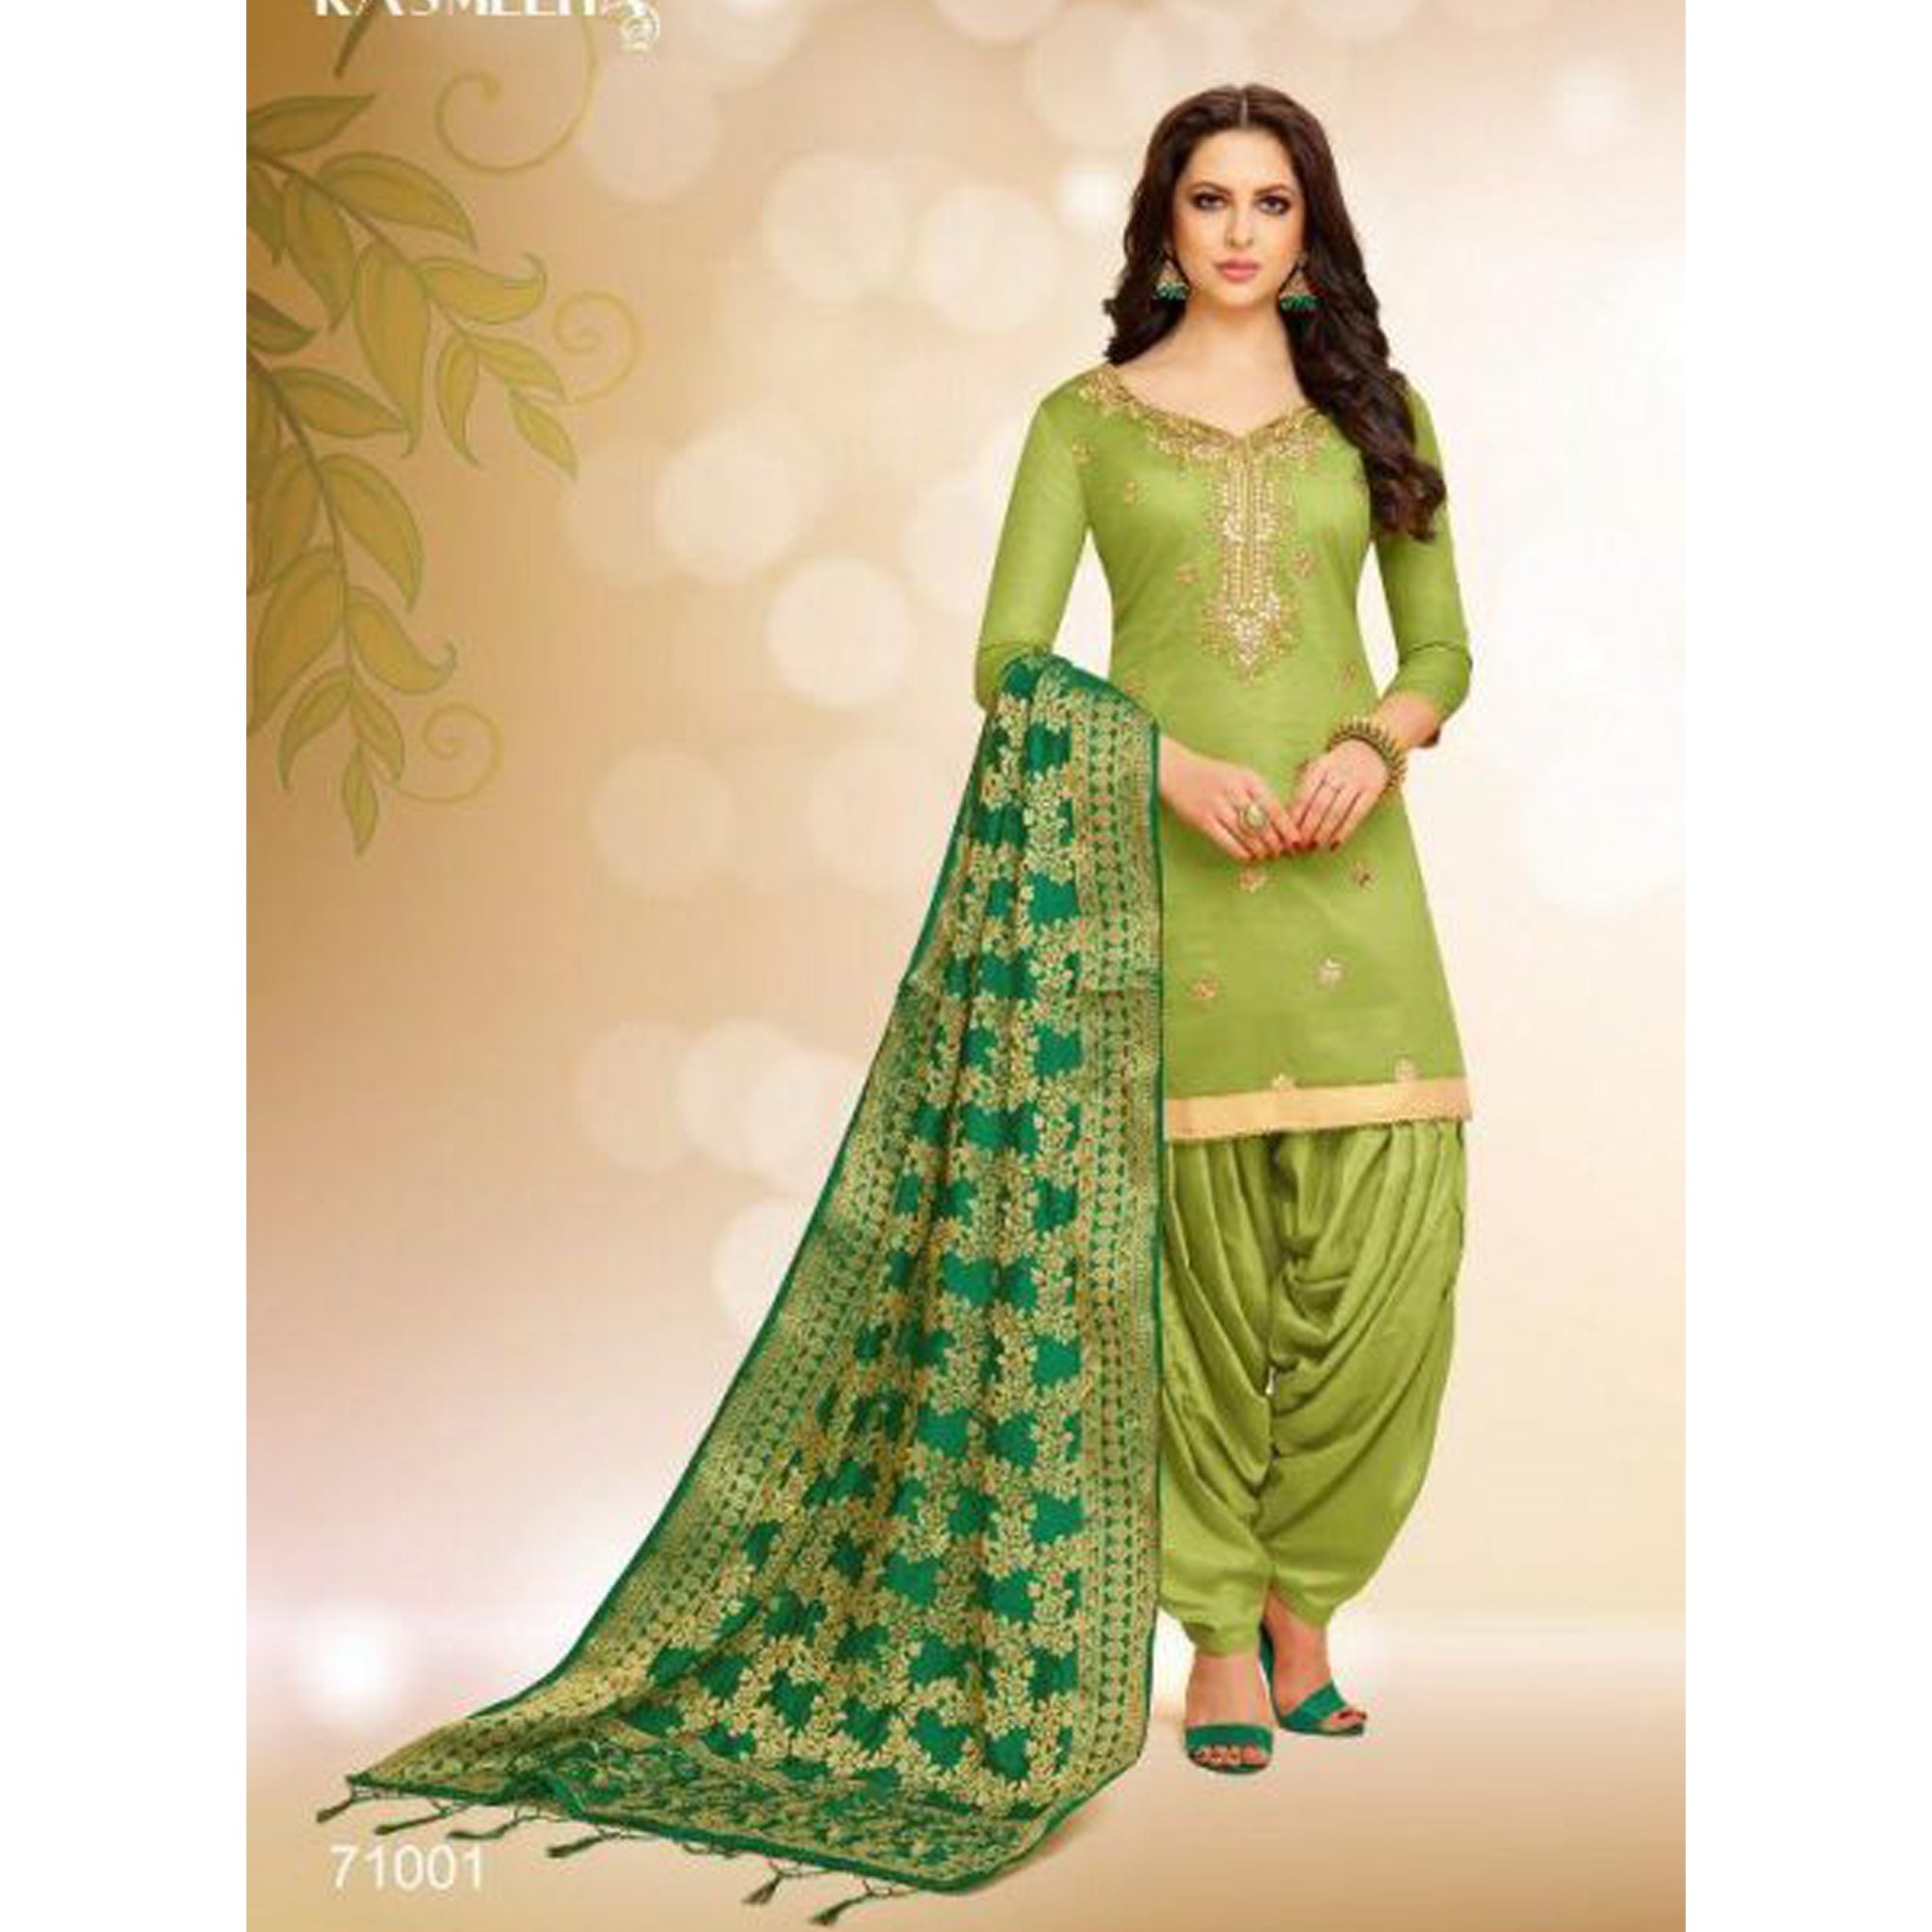 Boat Neck Patiala Suits: Buy Boat Neck Patiala Suits for Women Online in USA